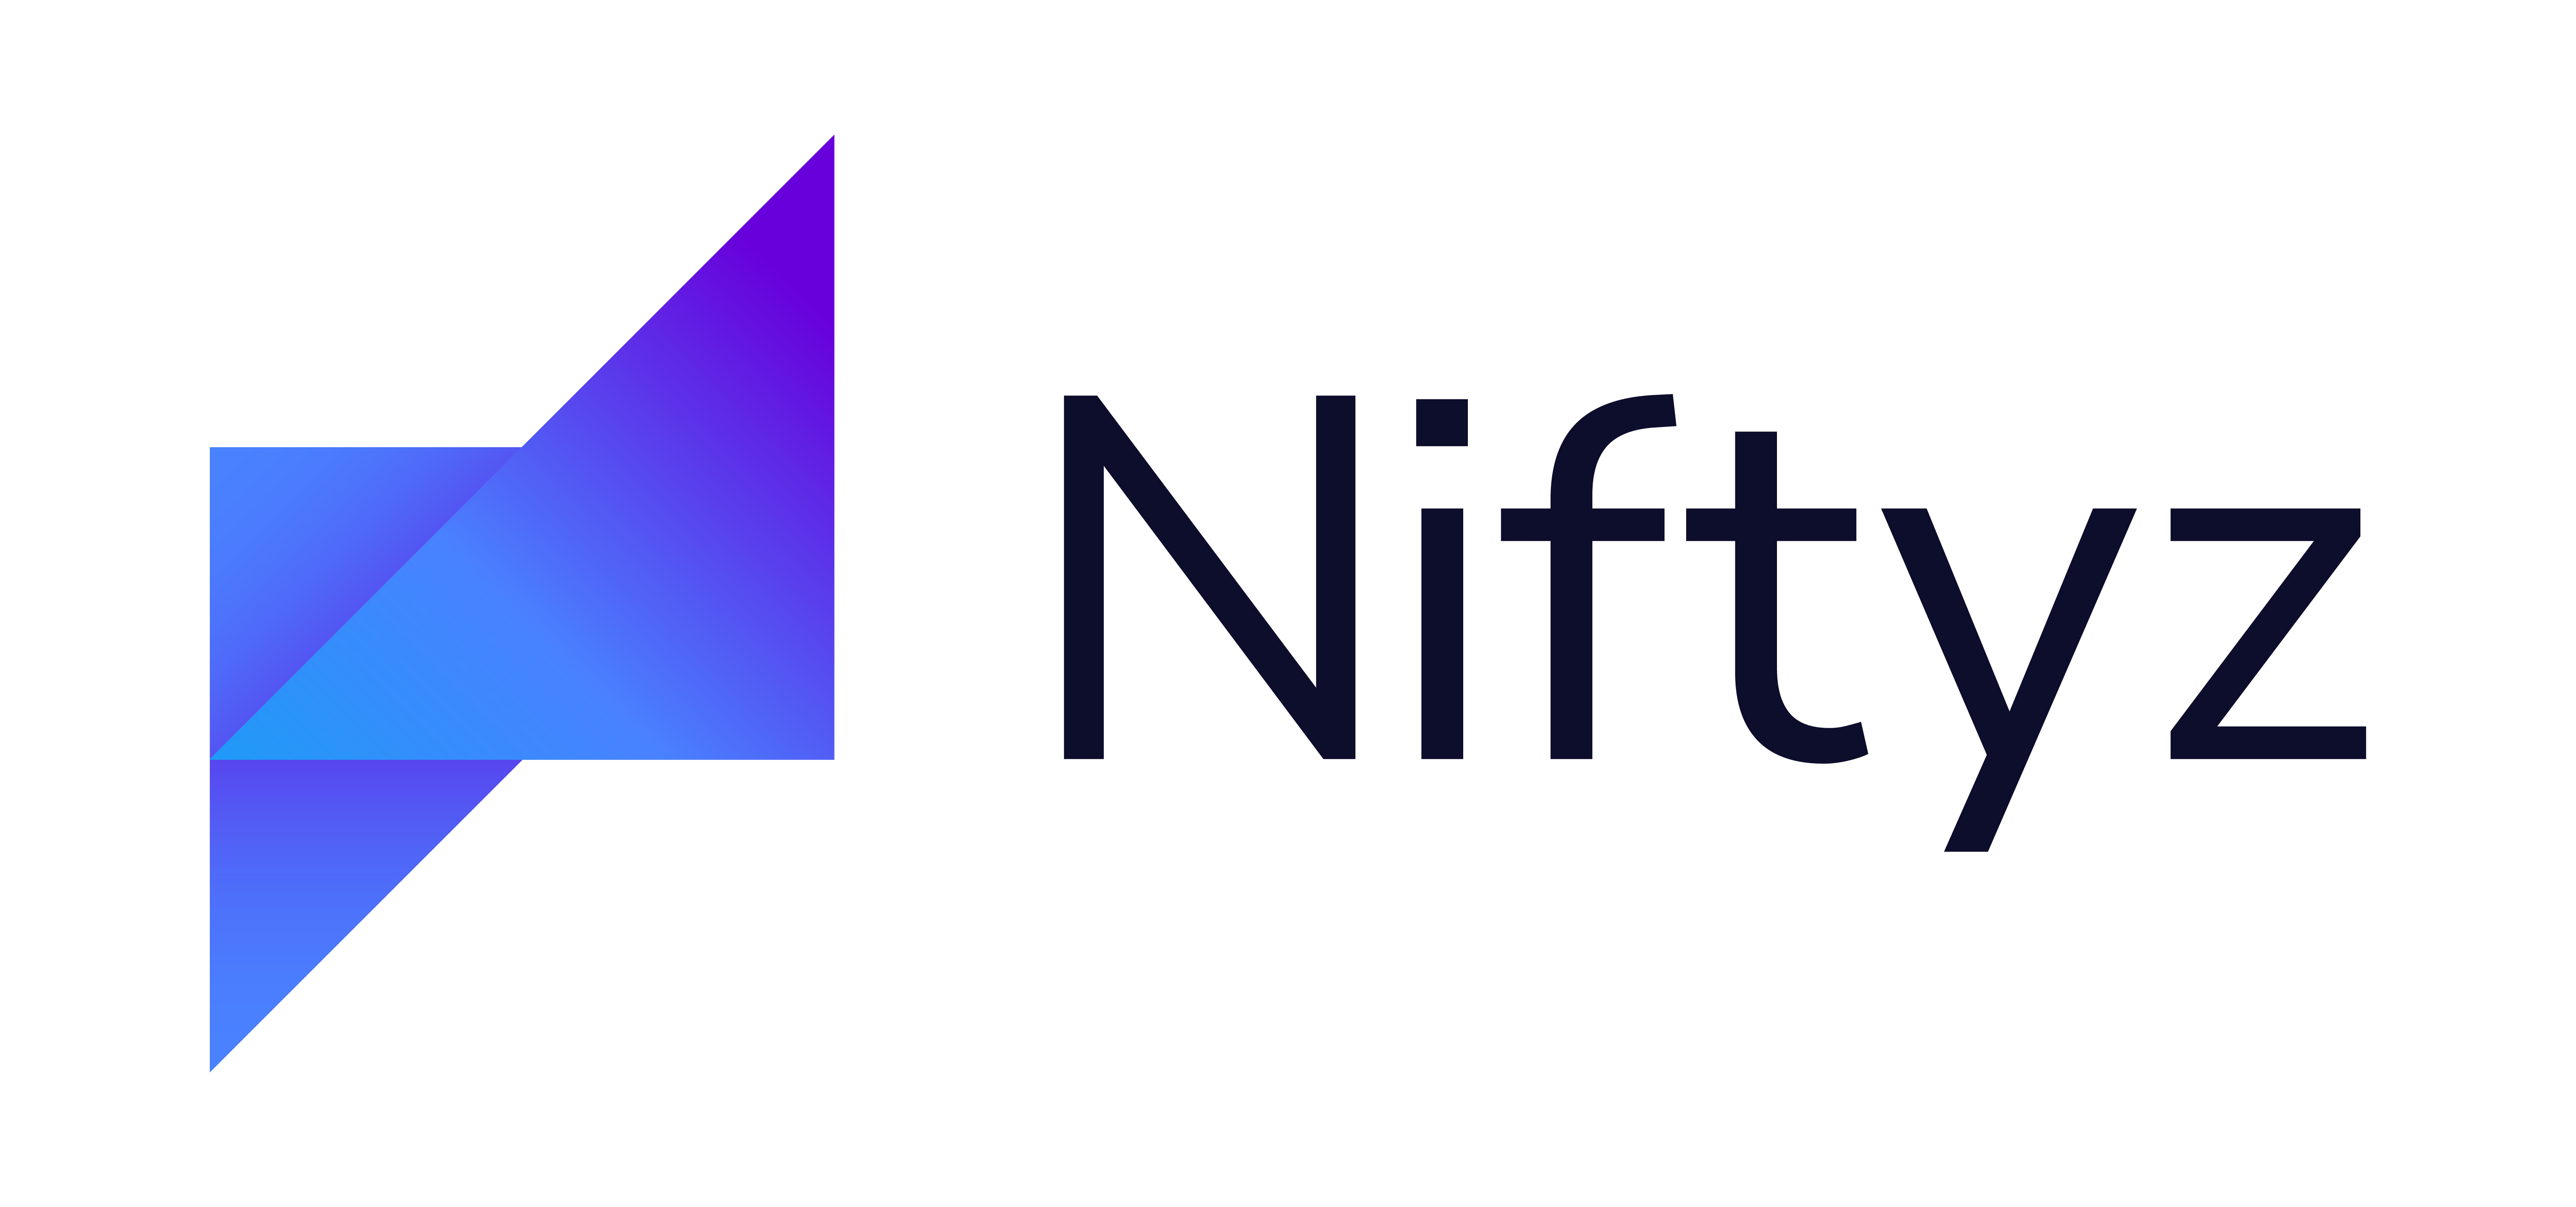 Say Goodbye To The Zip File: Niftyz is UK’s First B2B NFT Platform